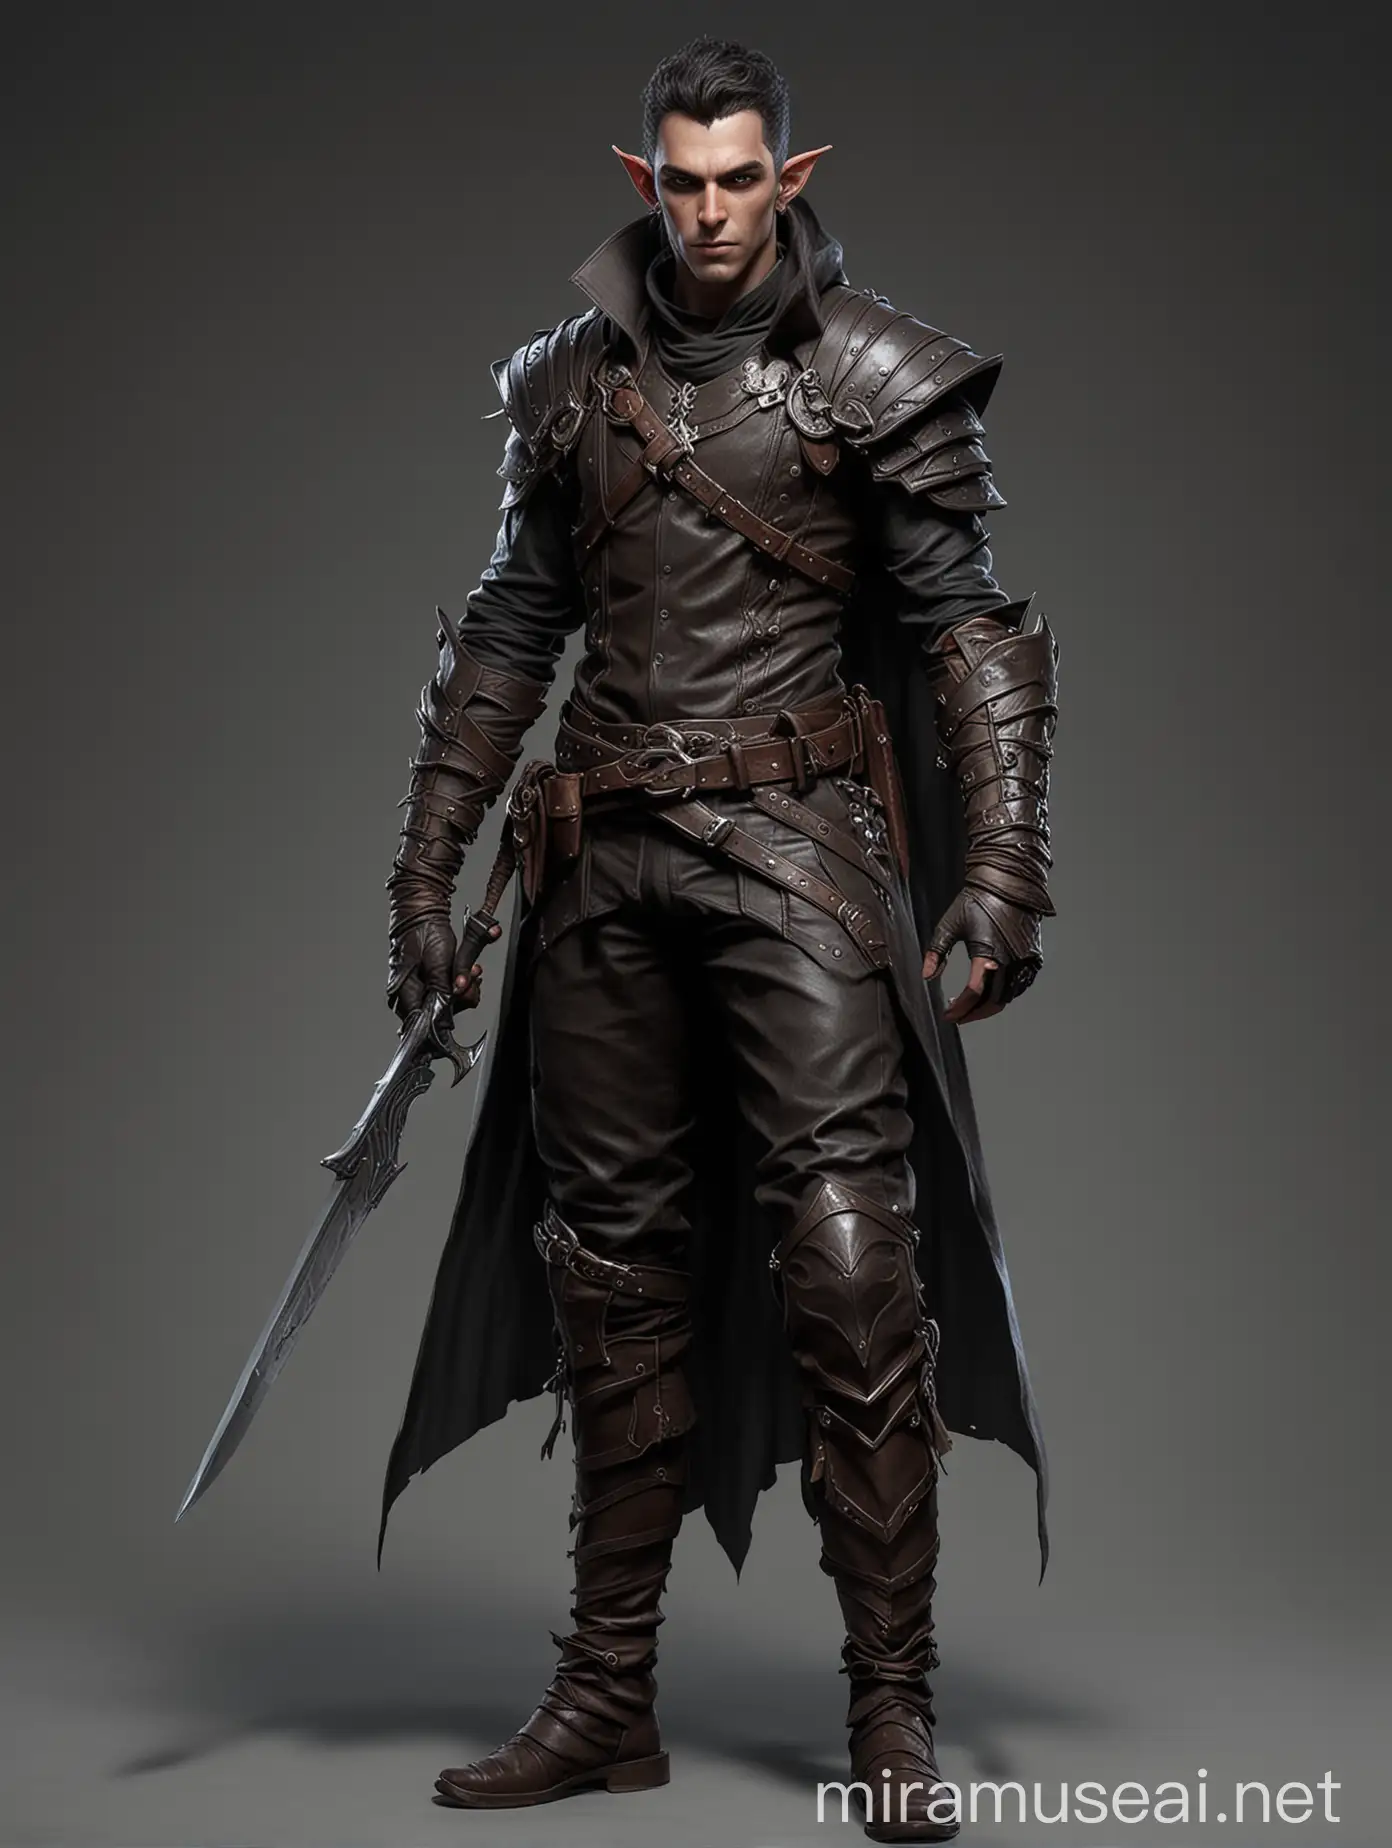 Mysterious Male Elf Assassin in Leather Attire with Daggers Fantasy Character Design